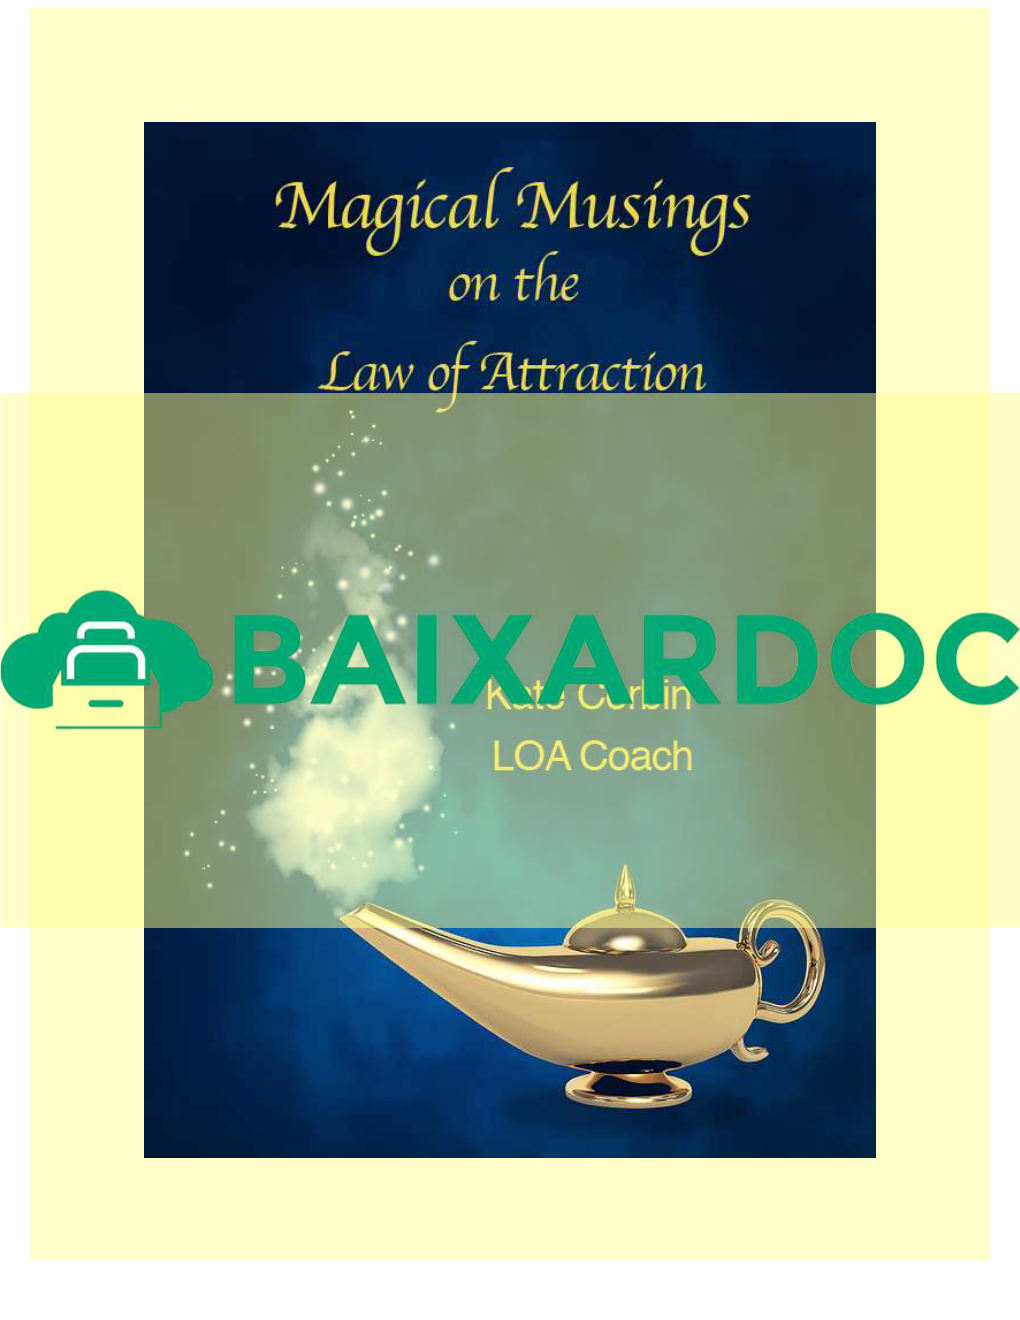 Magical Musings on the Law of Attraction